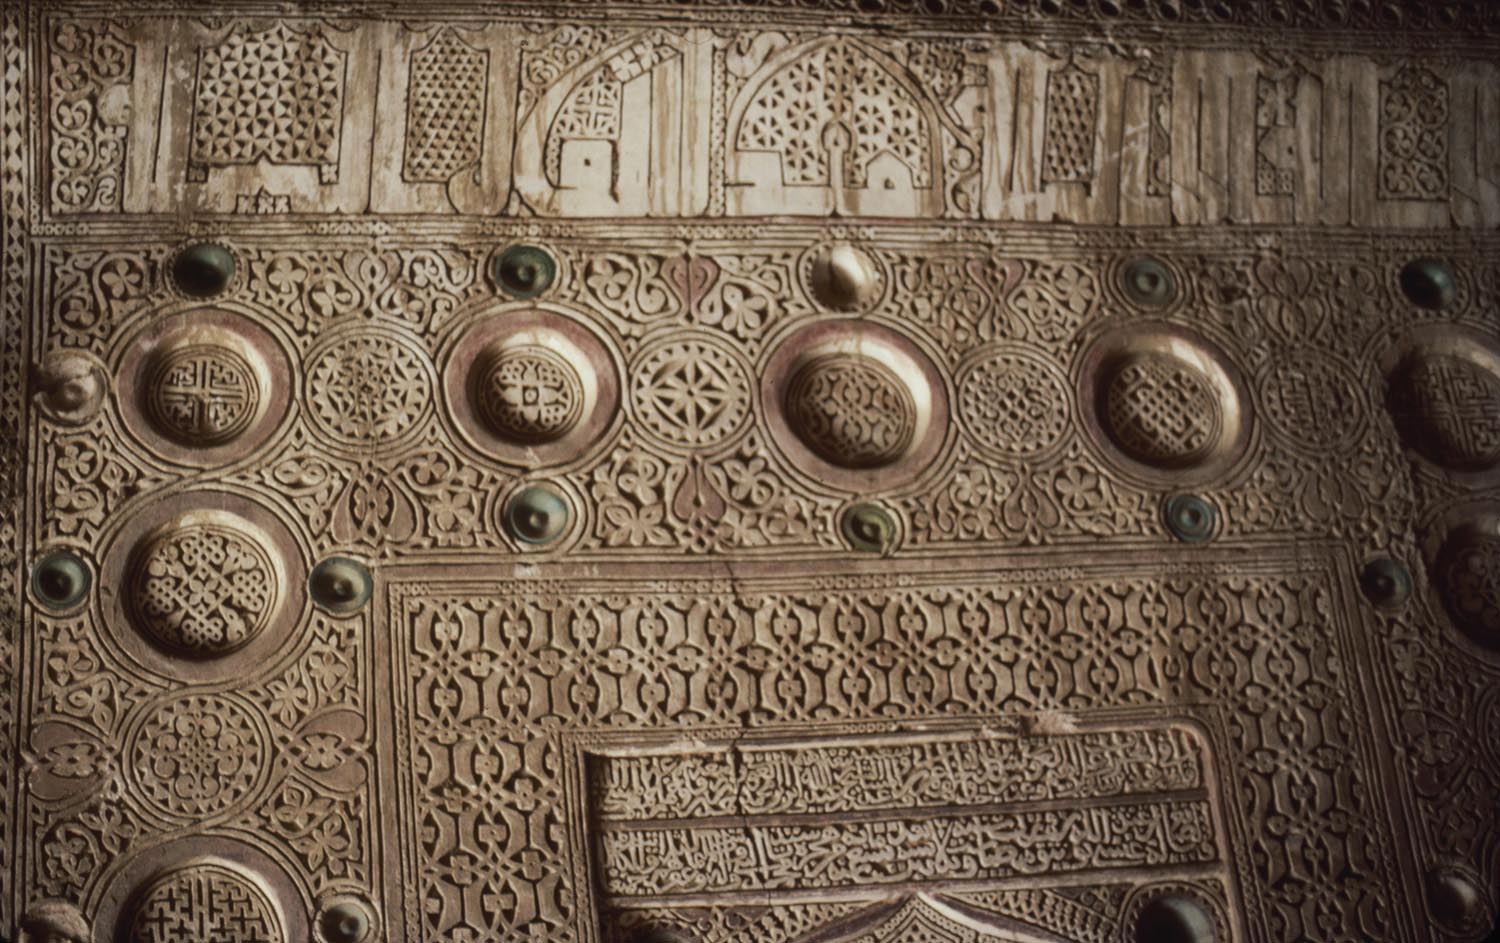 Detail of mihrab showing carved stucco work and inscription on frame.